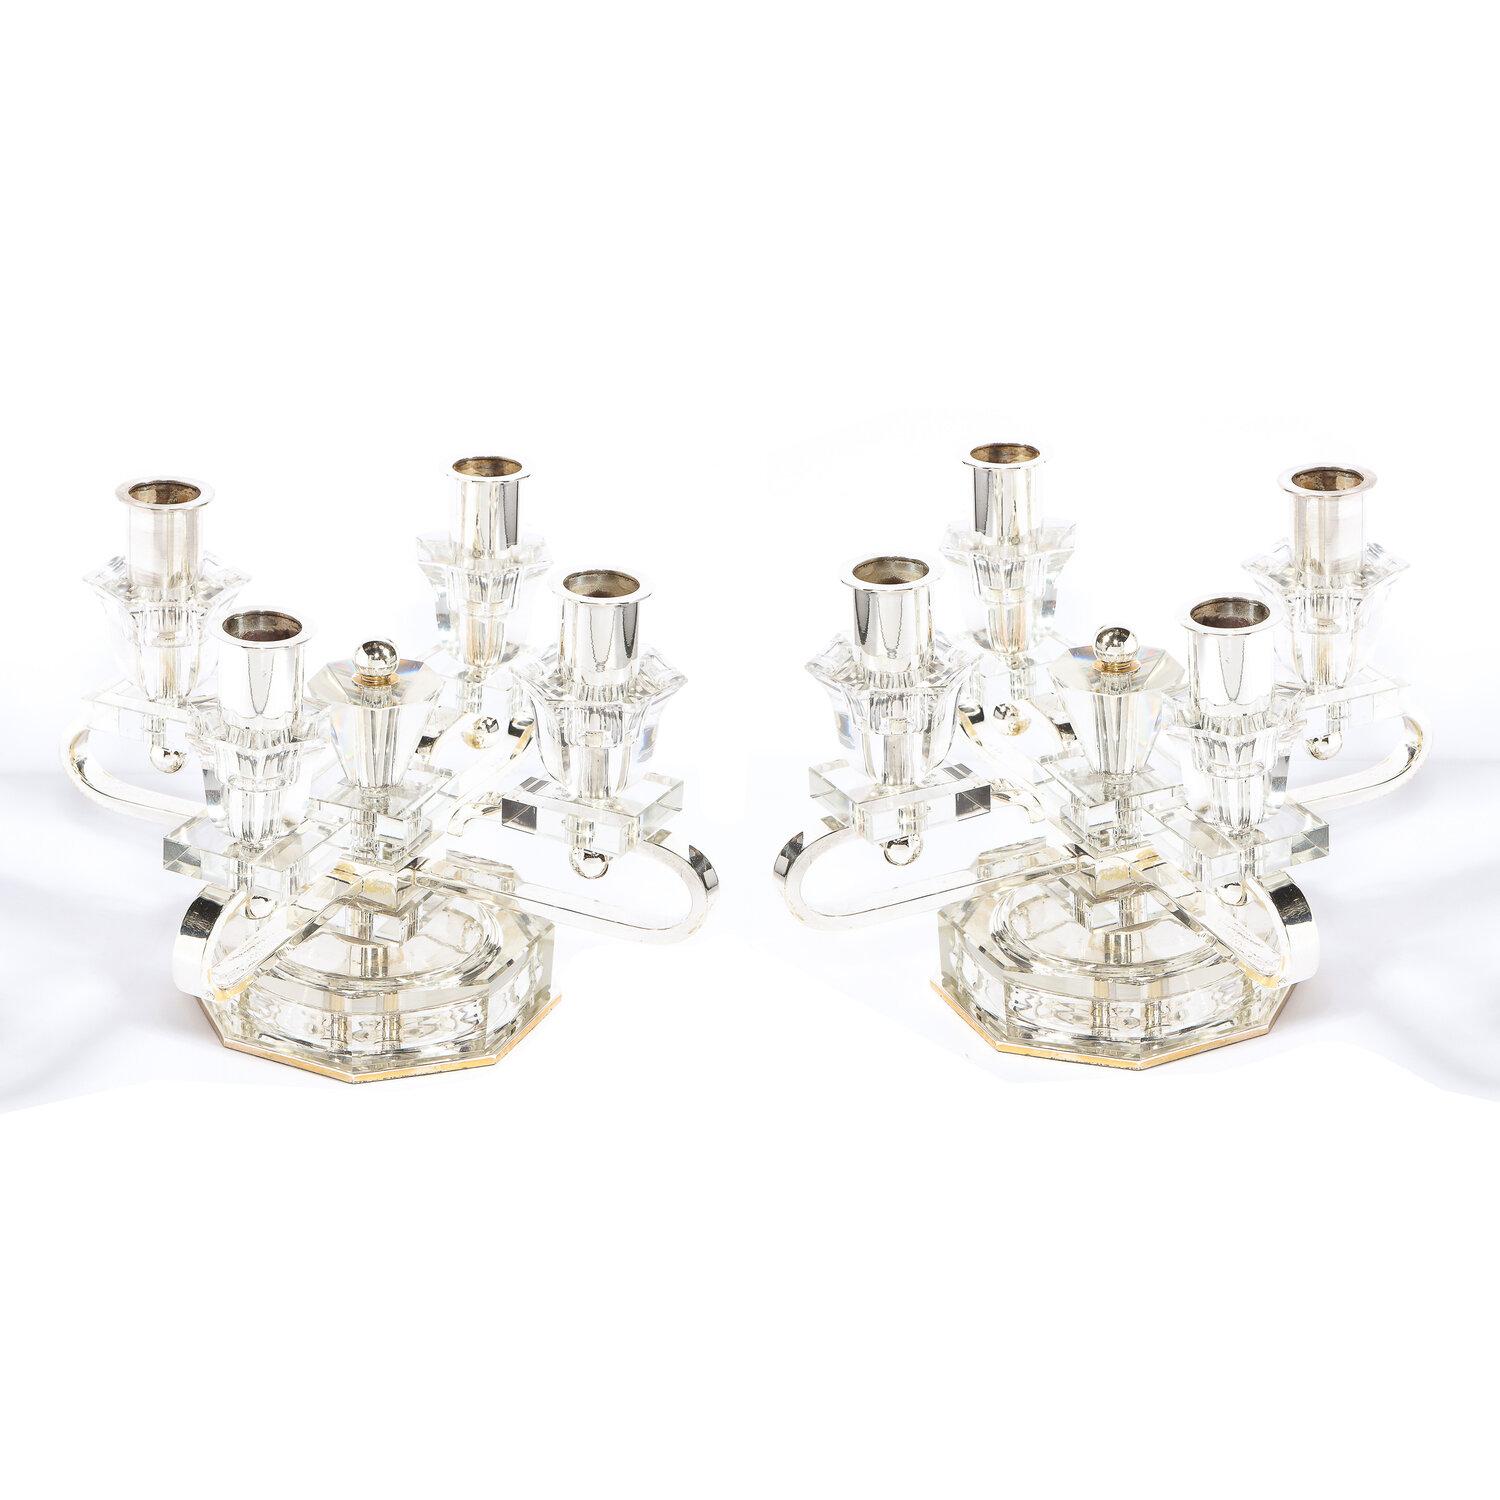 Hollywood Regency Pair of 1940s French Art Deco Four Arm Silverplate & Crystal Candleholders For Sale